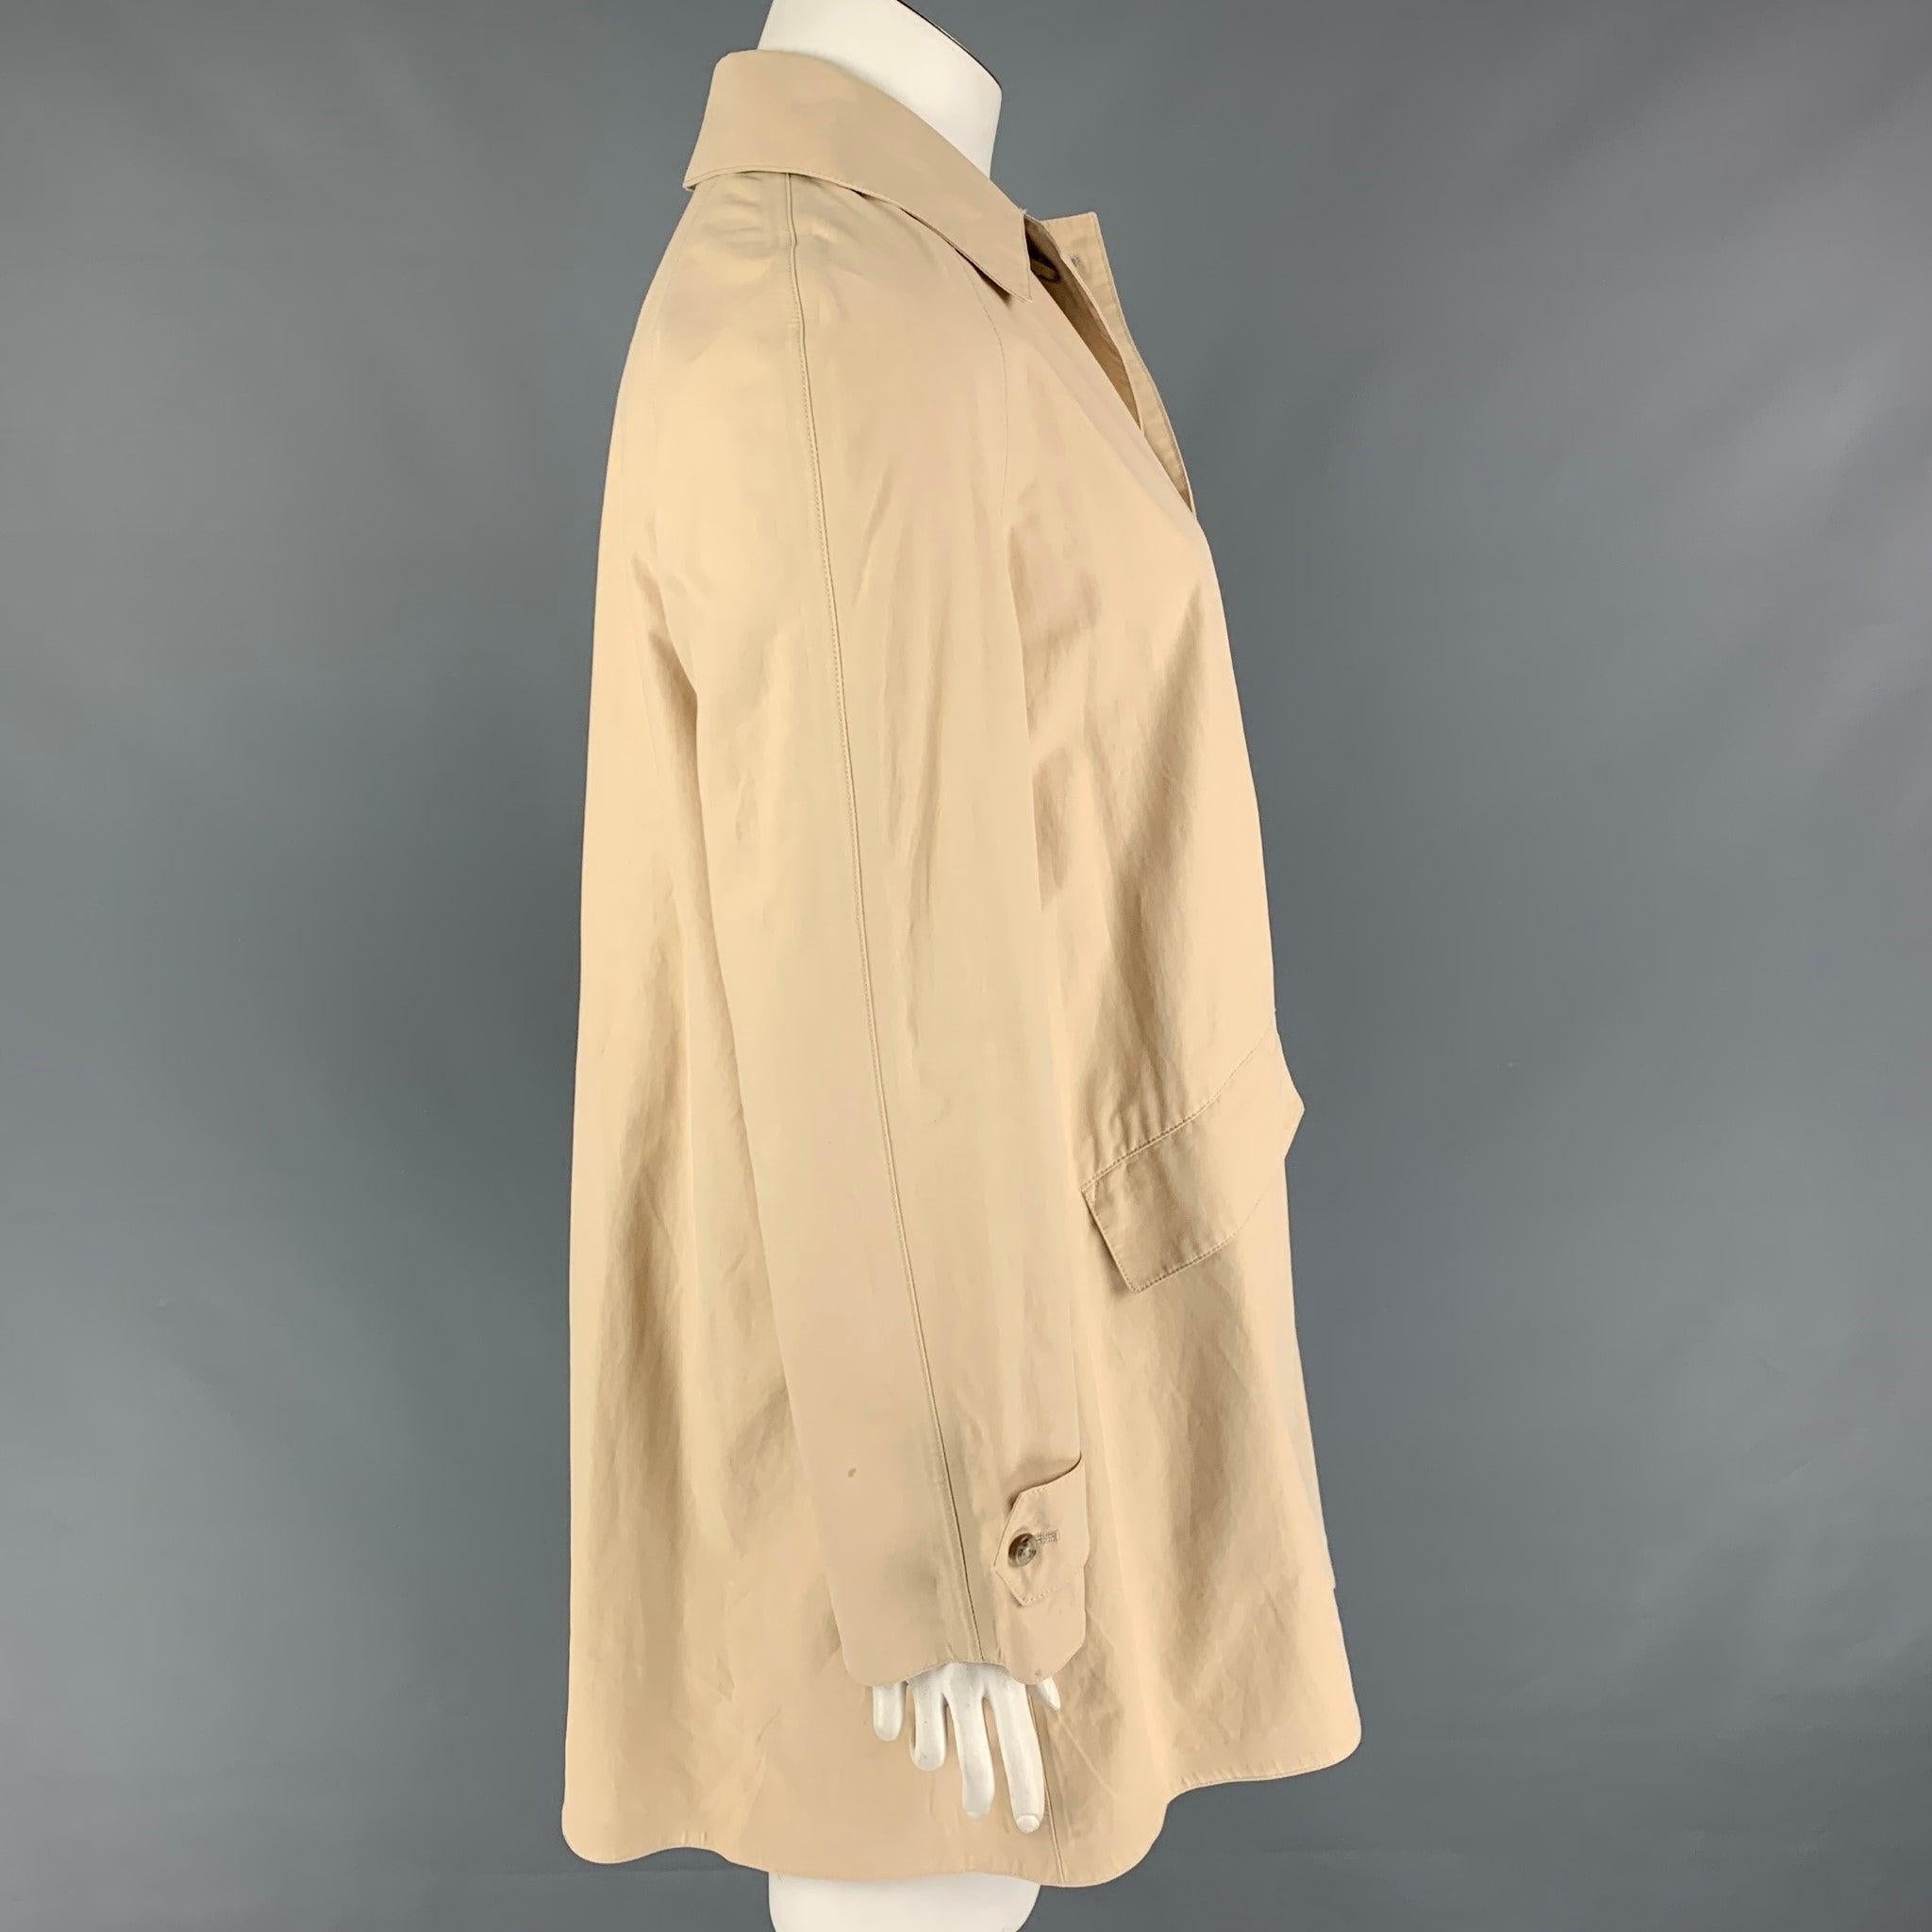 RALPH LAUREN 'Blue Label' coat comes in a beige cotton featuring a spread collar, flap pockets, single back vent, and a hidden placket closure. Made in Italy.
Very Good
Pre-Owned Condition. 

Marked:   10 

Measurements: 
 
Shoulder: 18 inches 